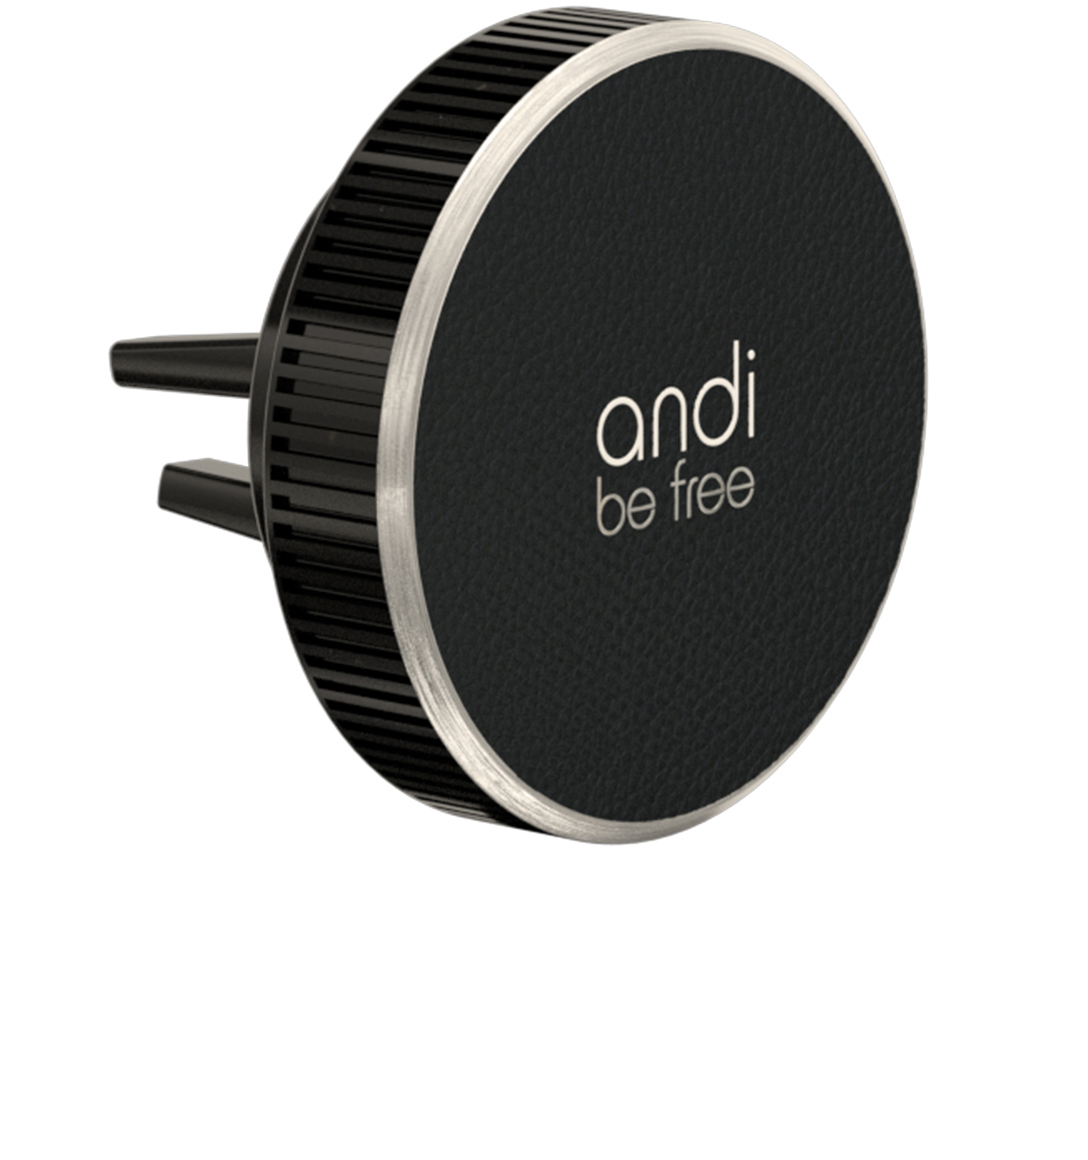 ANDI BE Wireless Schwarz Charger Mount induktive Fast FREE ladestation, Vent